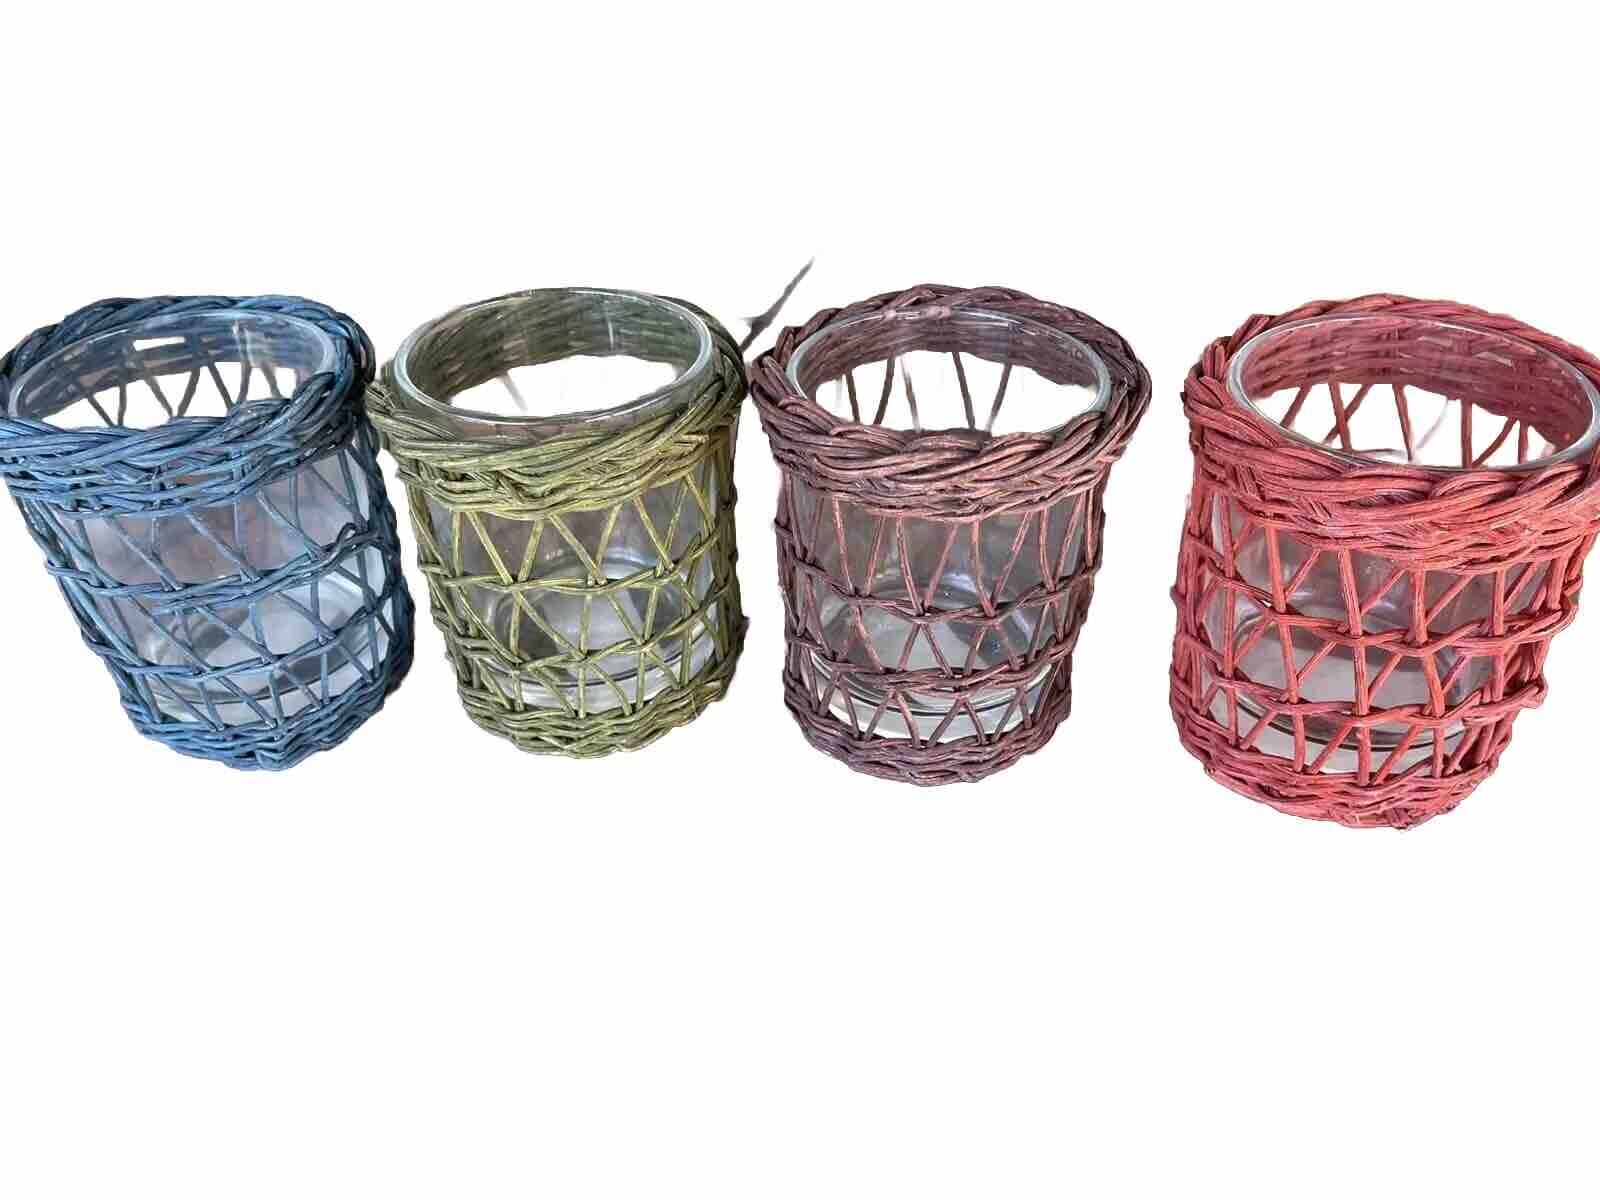 New Woven Wicker Rattan Candle Holder Glass Set 4 Red Blue Green Brown